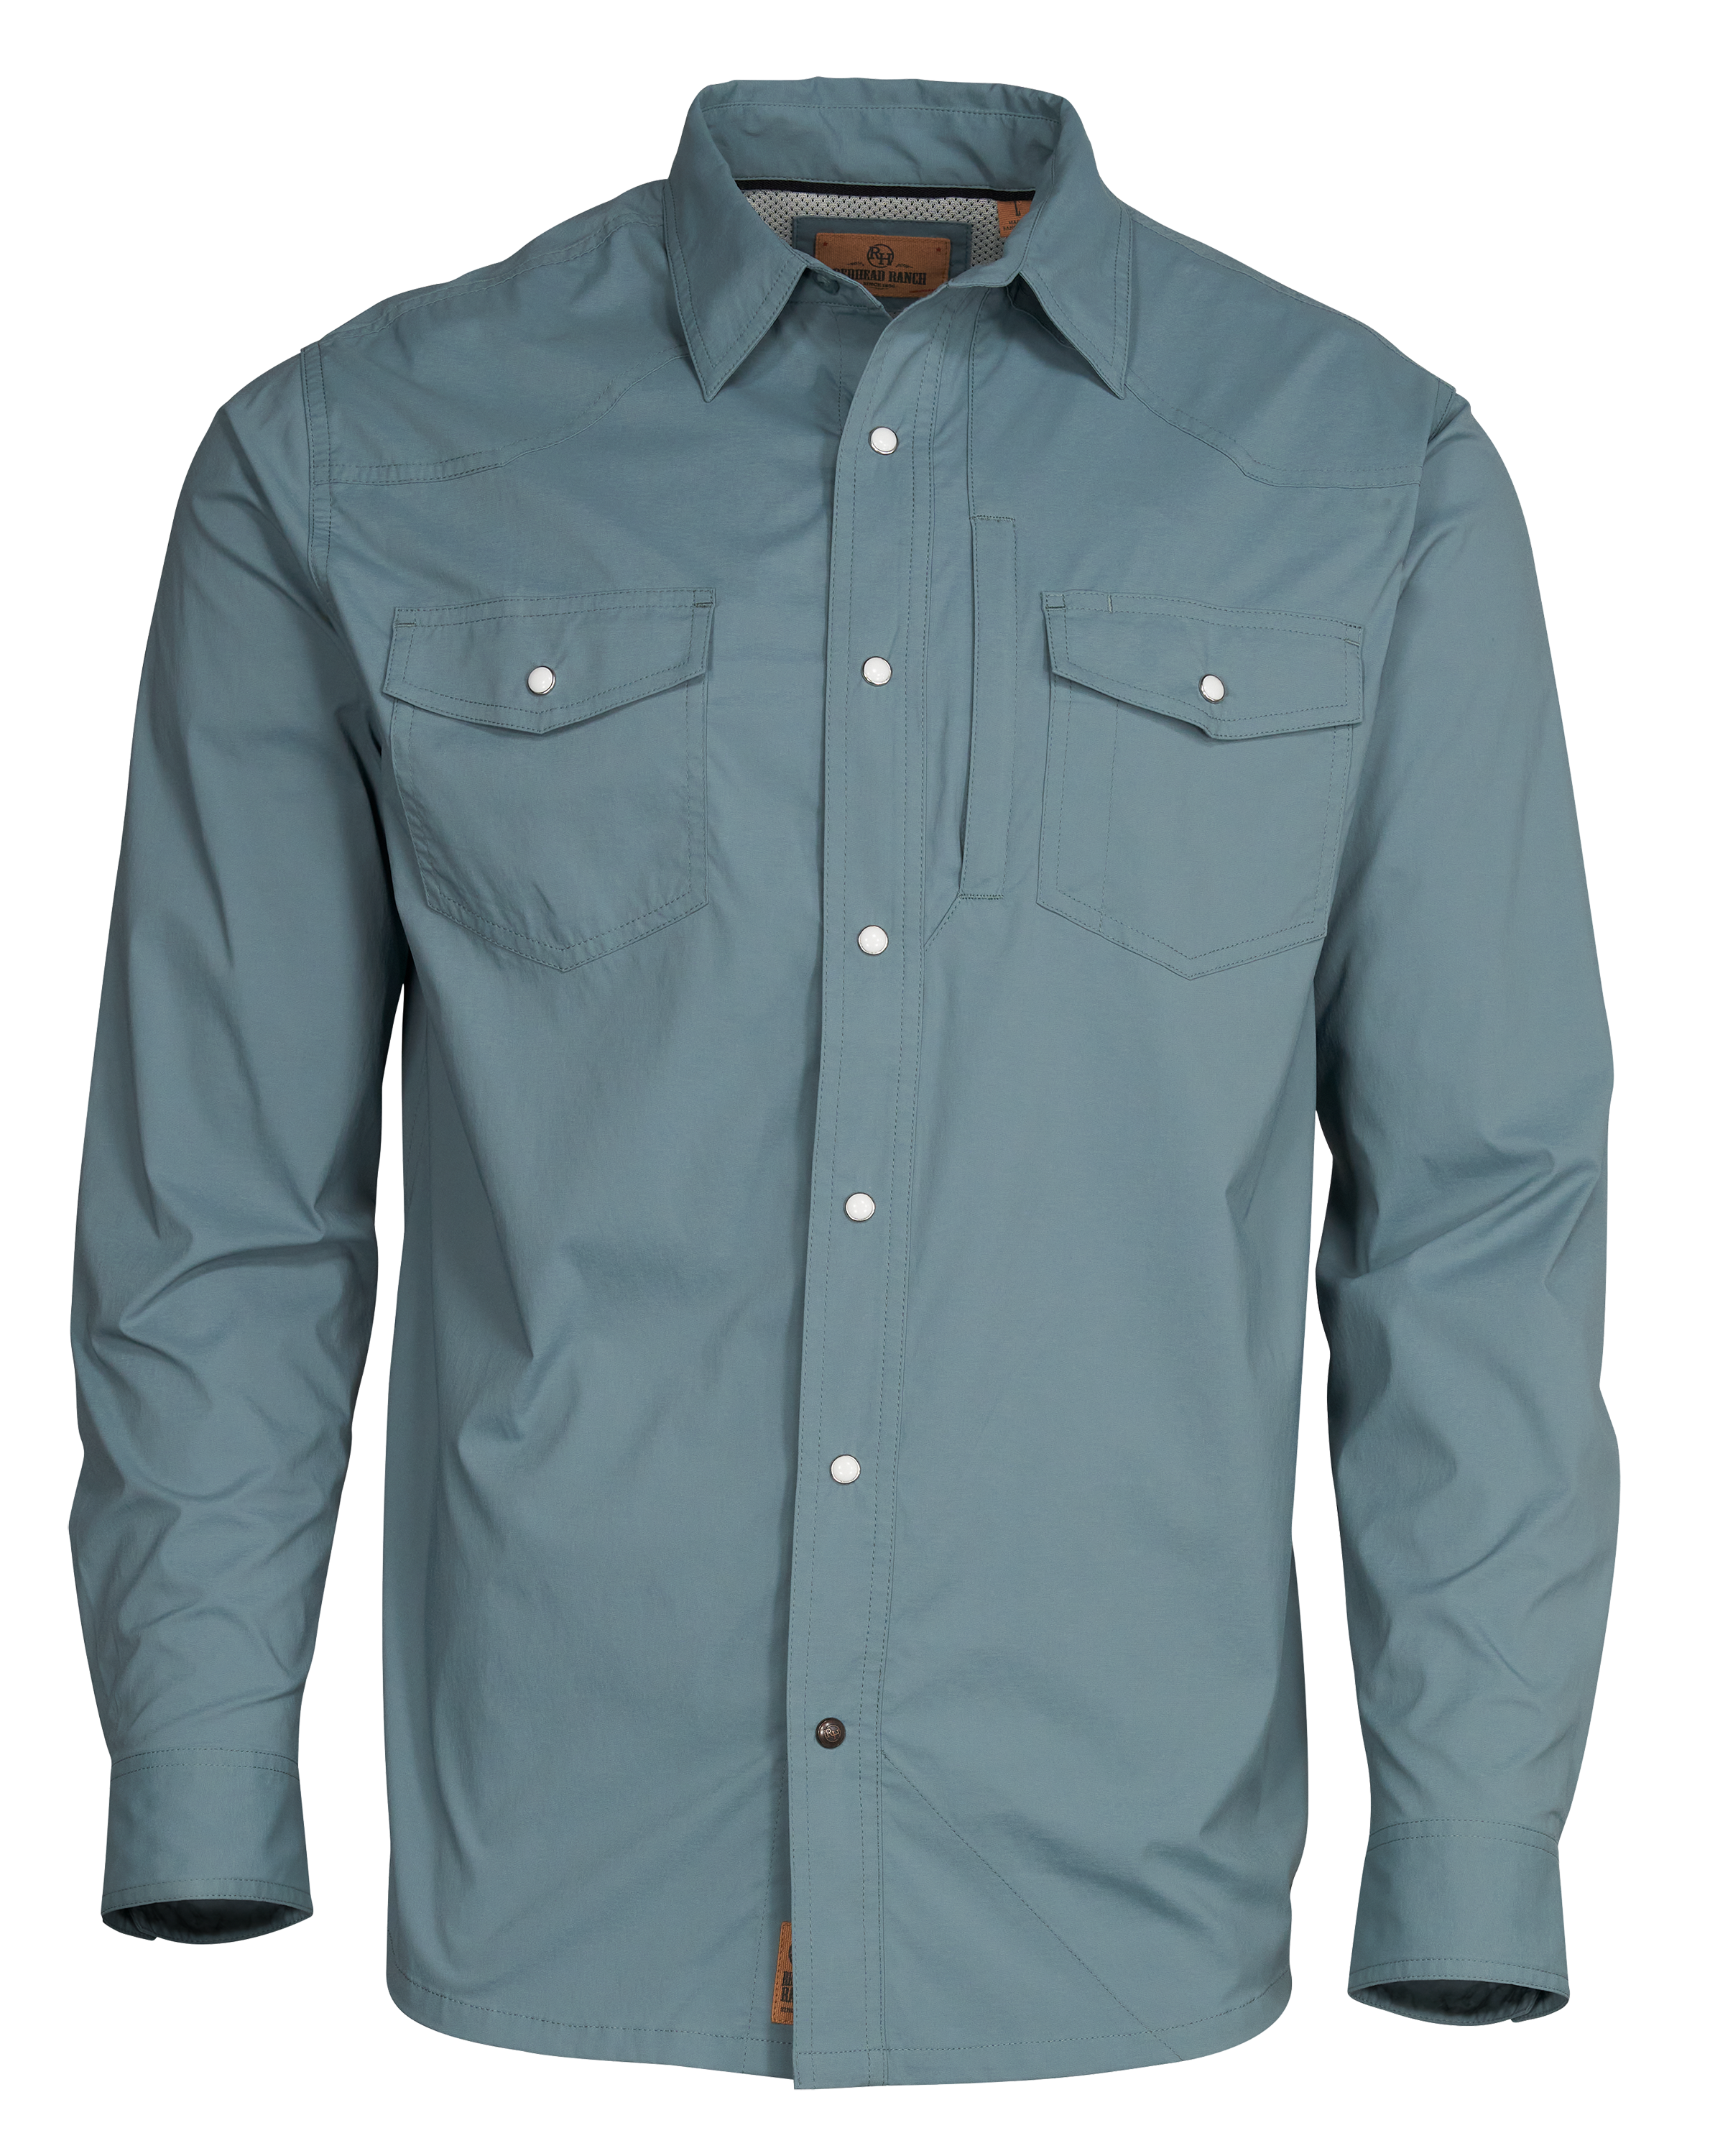 RedHead Ranch Canyonville Performance Long-Sleeve Shirt for Men